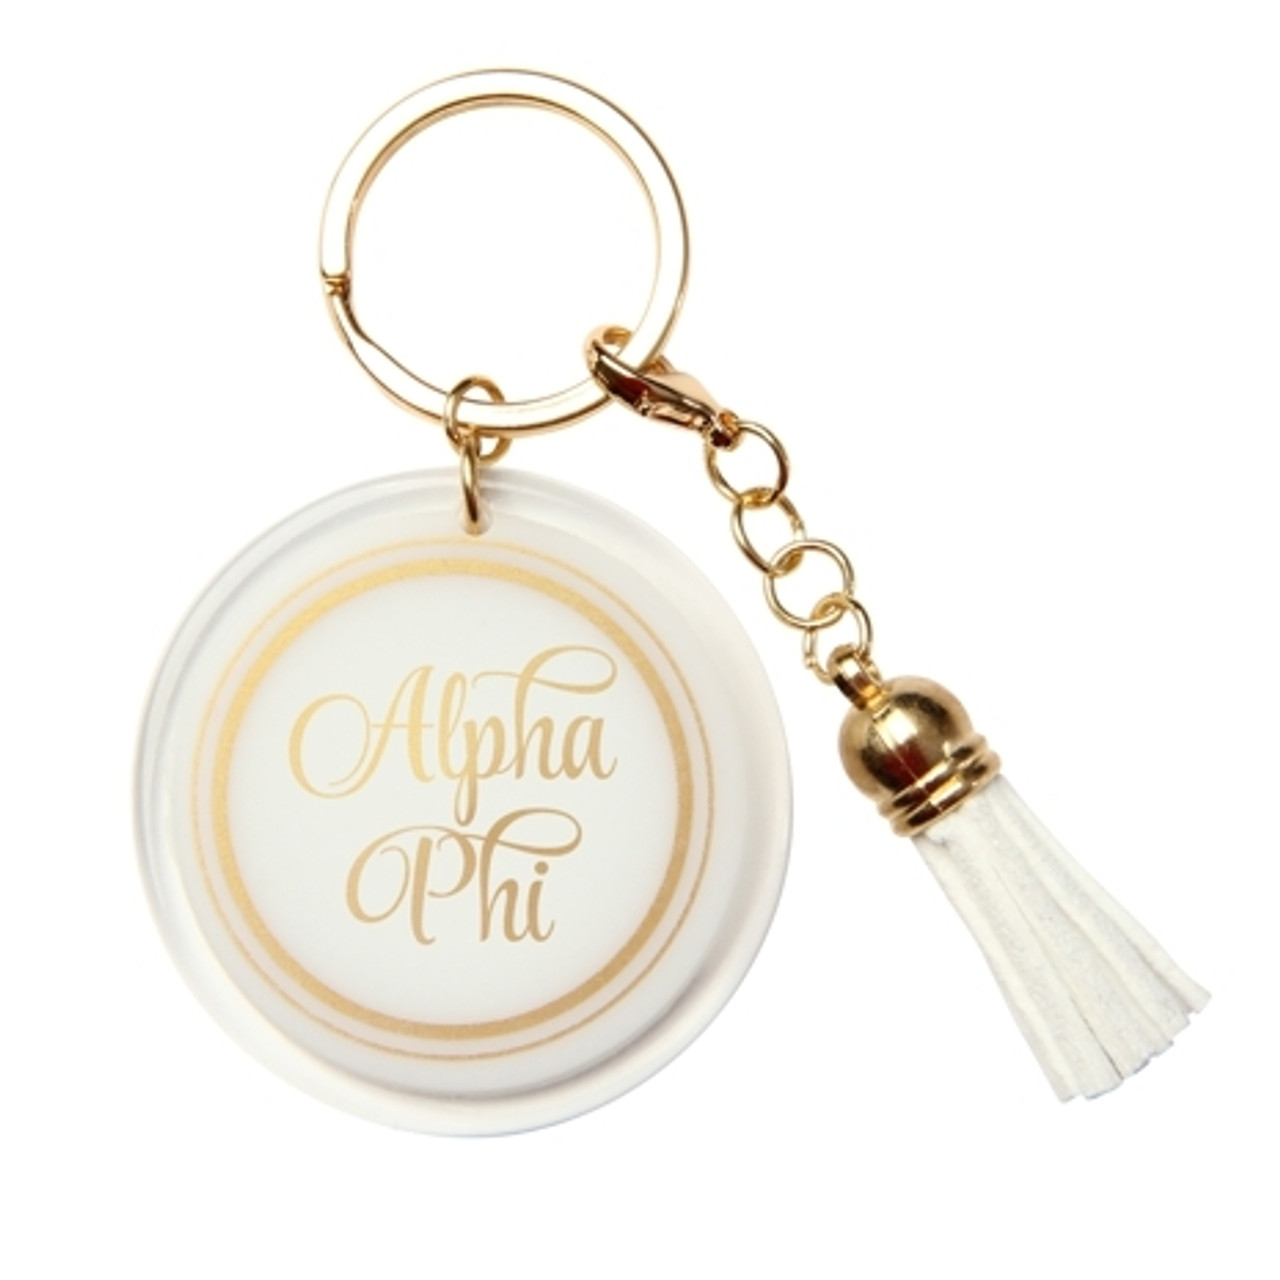 Top Selling Alpha Phi Items